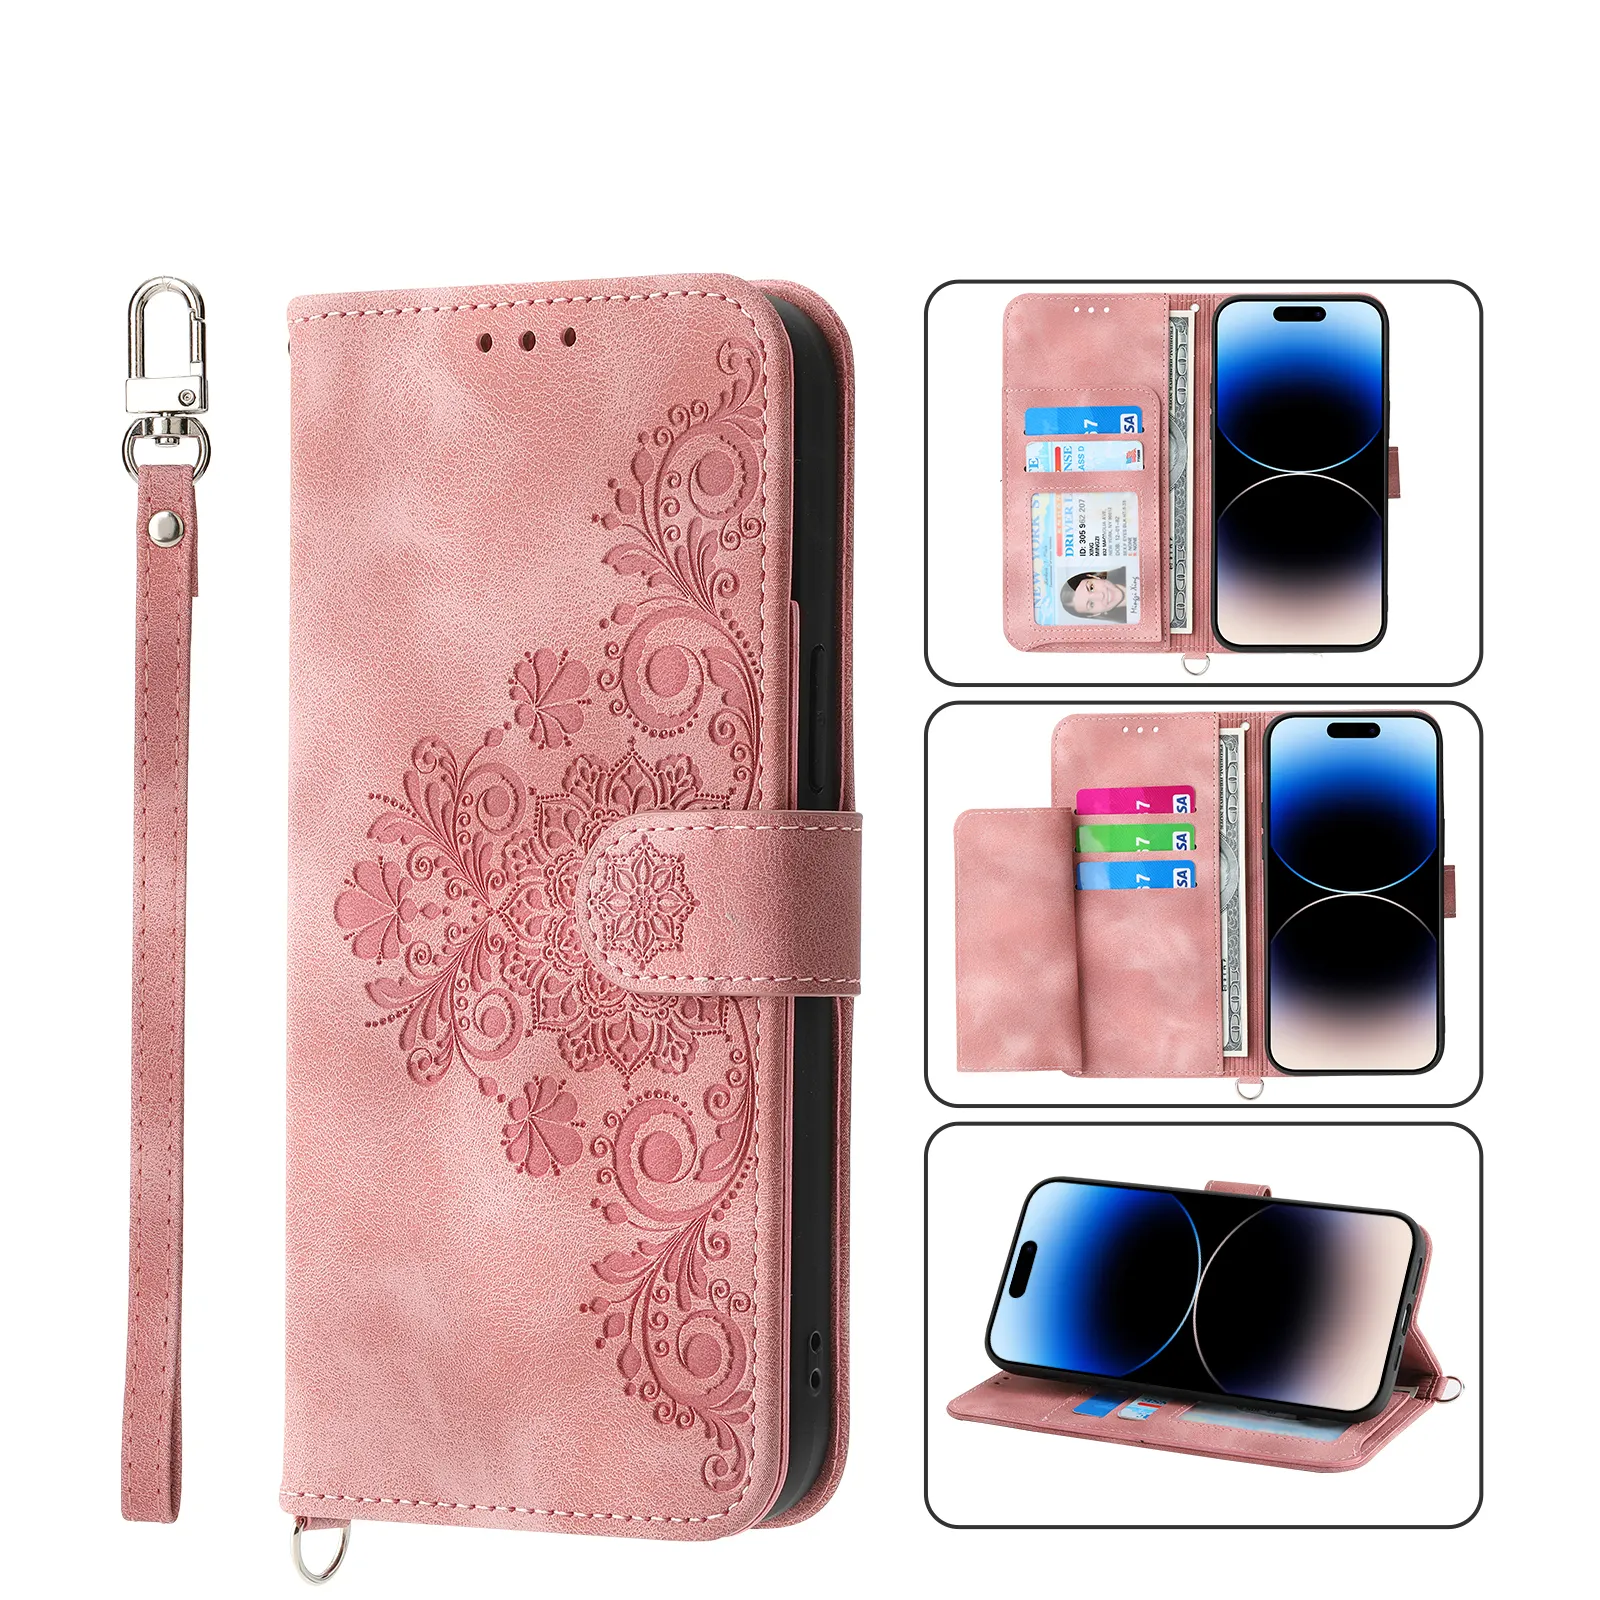 IPhone 15 Pro Max 14 Plus 1312 Mini 11 XS Max XR 8 Plus 7 6 Folio Filp Wallet Cover with Card Holder用レザー電話ケース